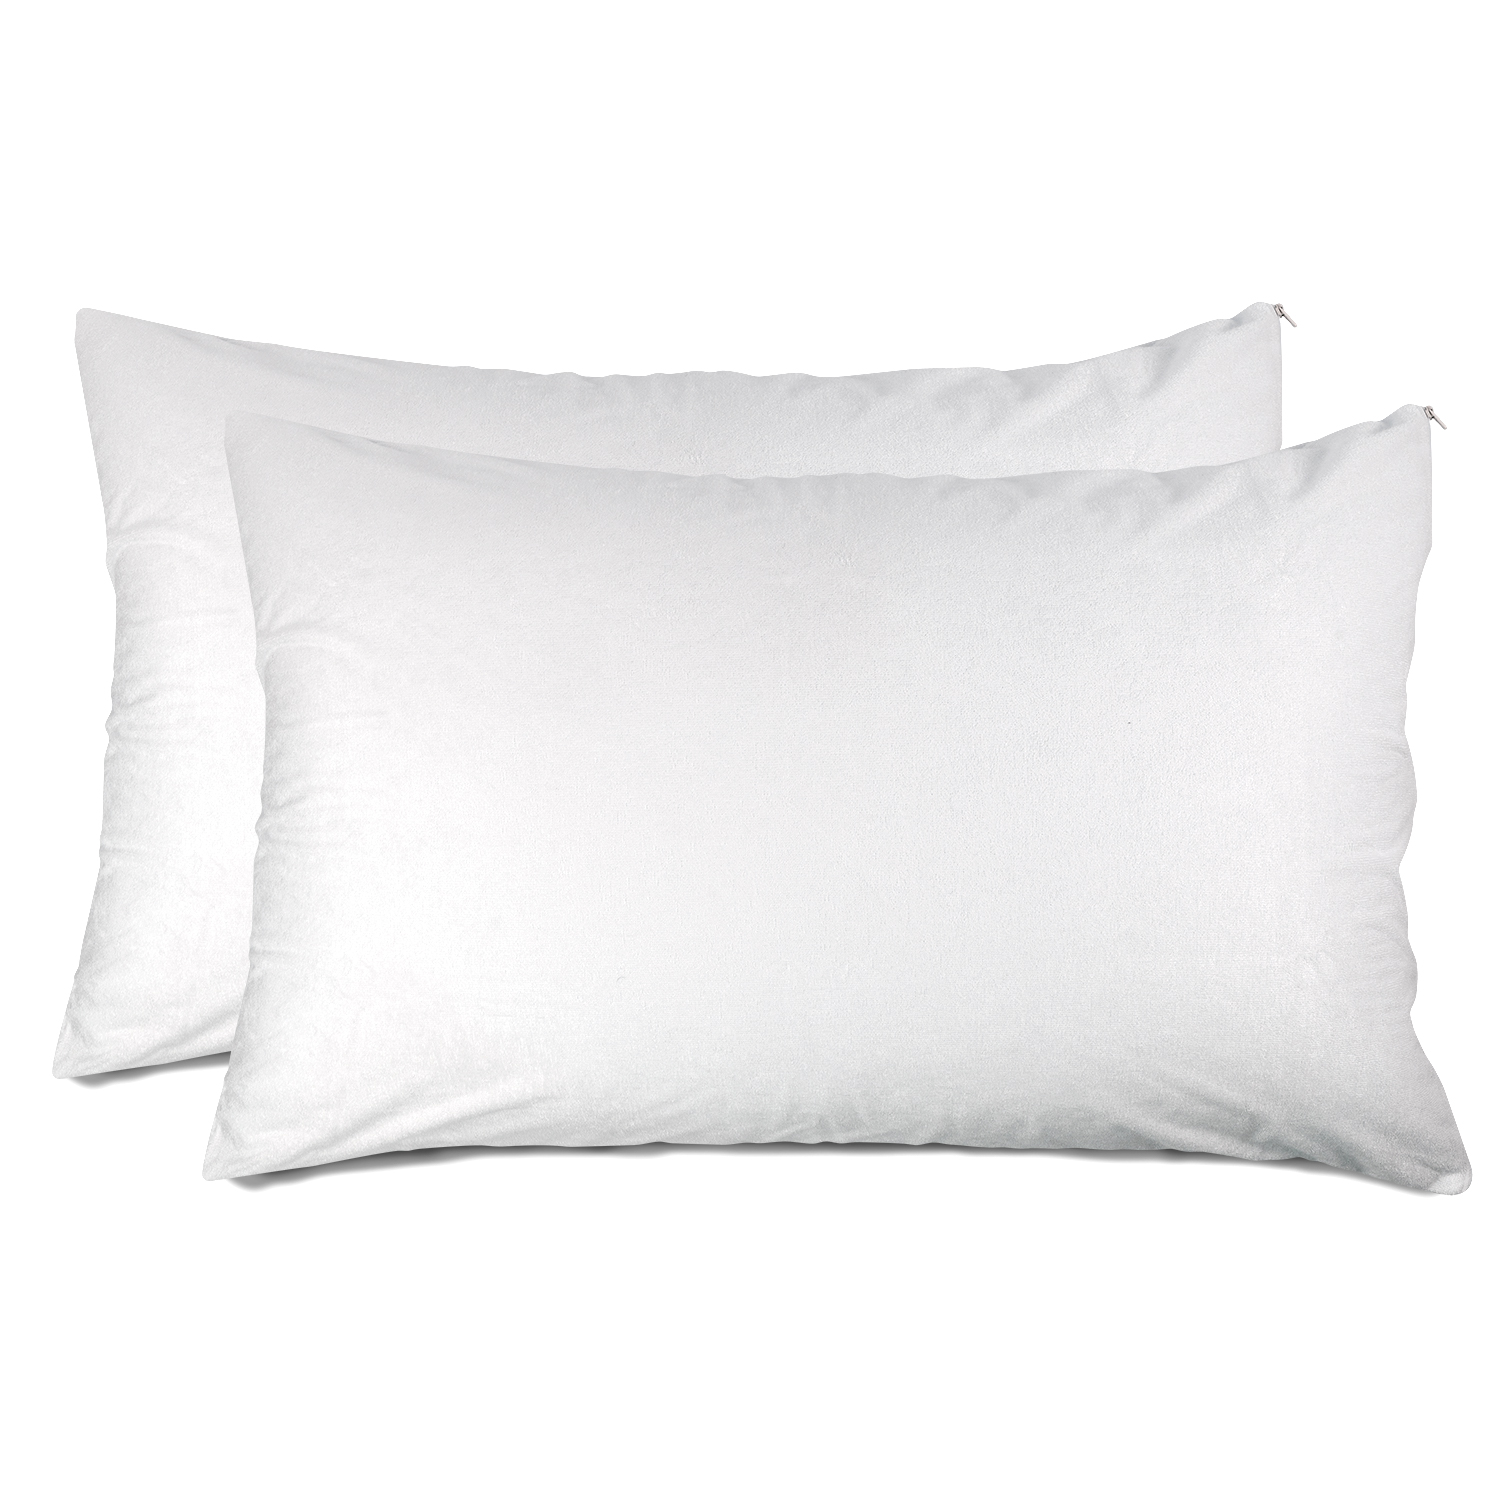 Luxury Zippered Pillow Protector